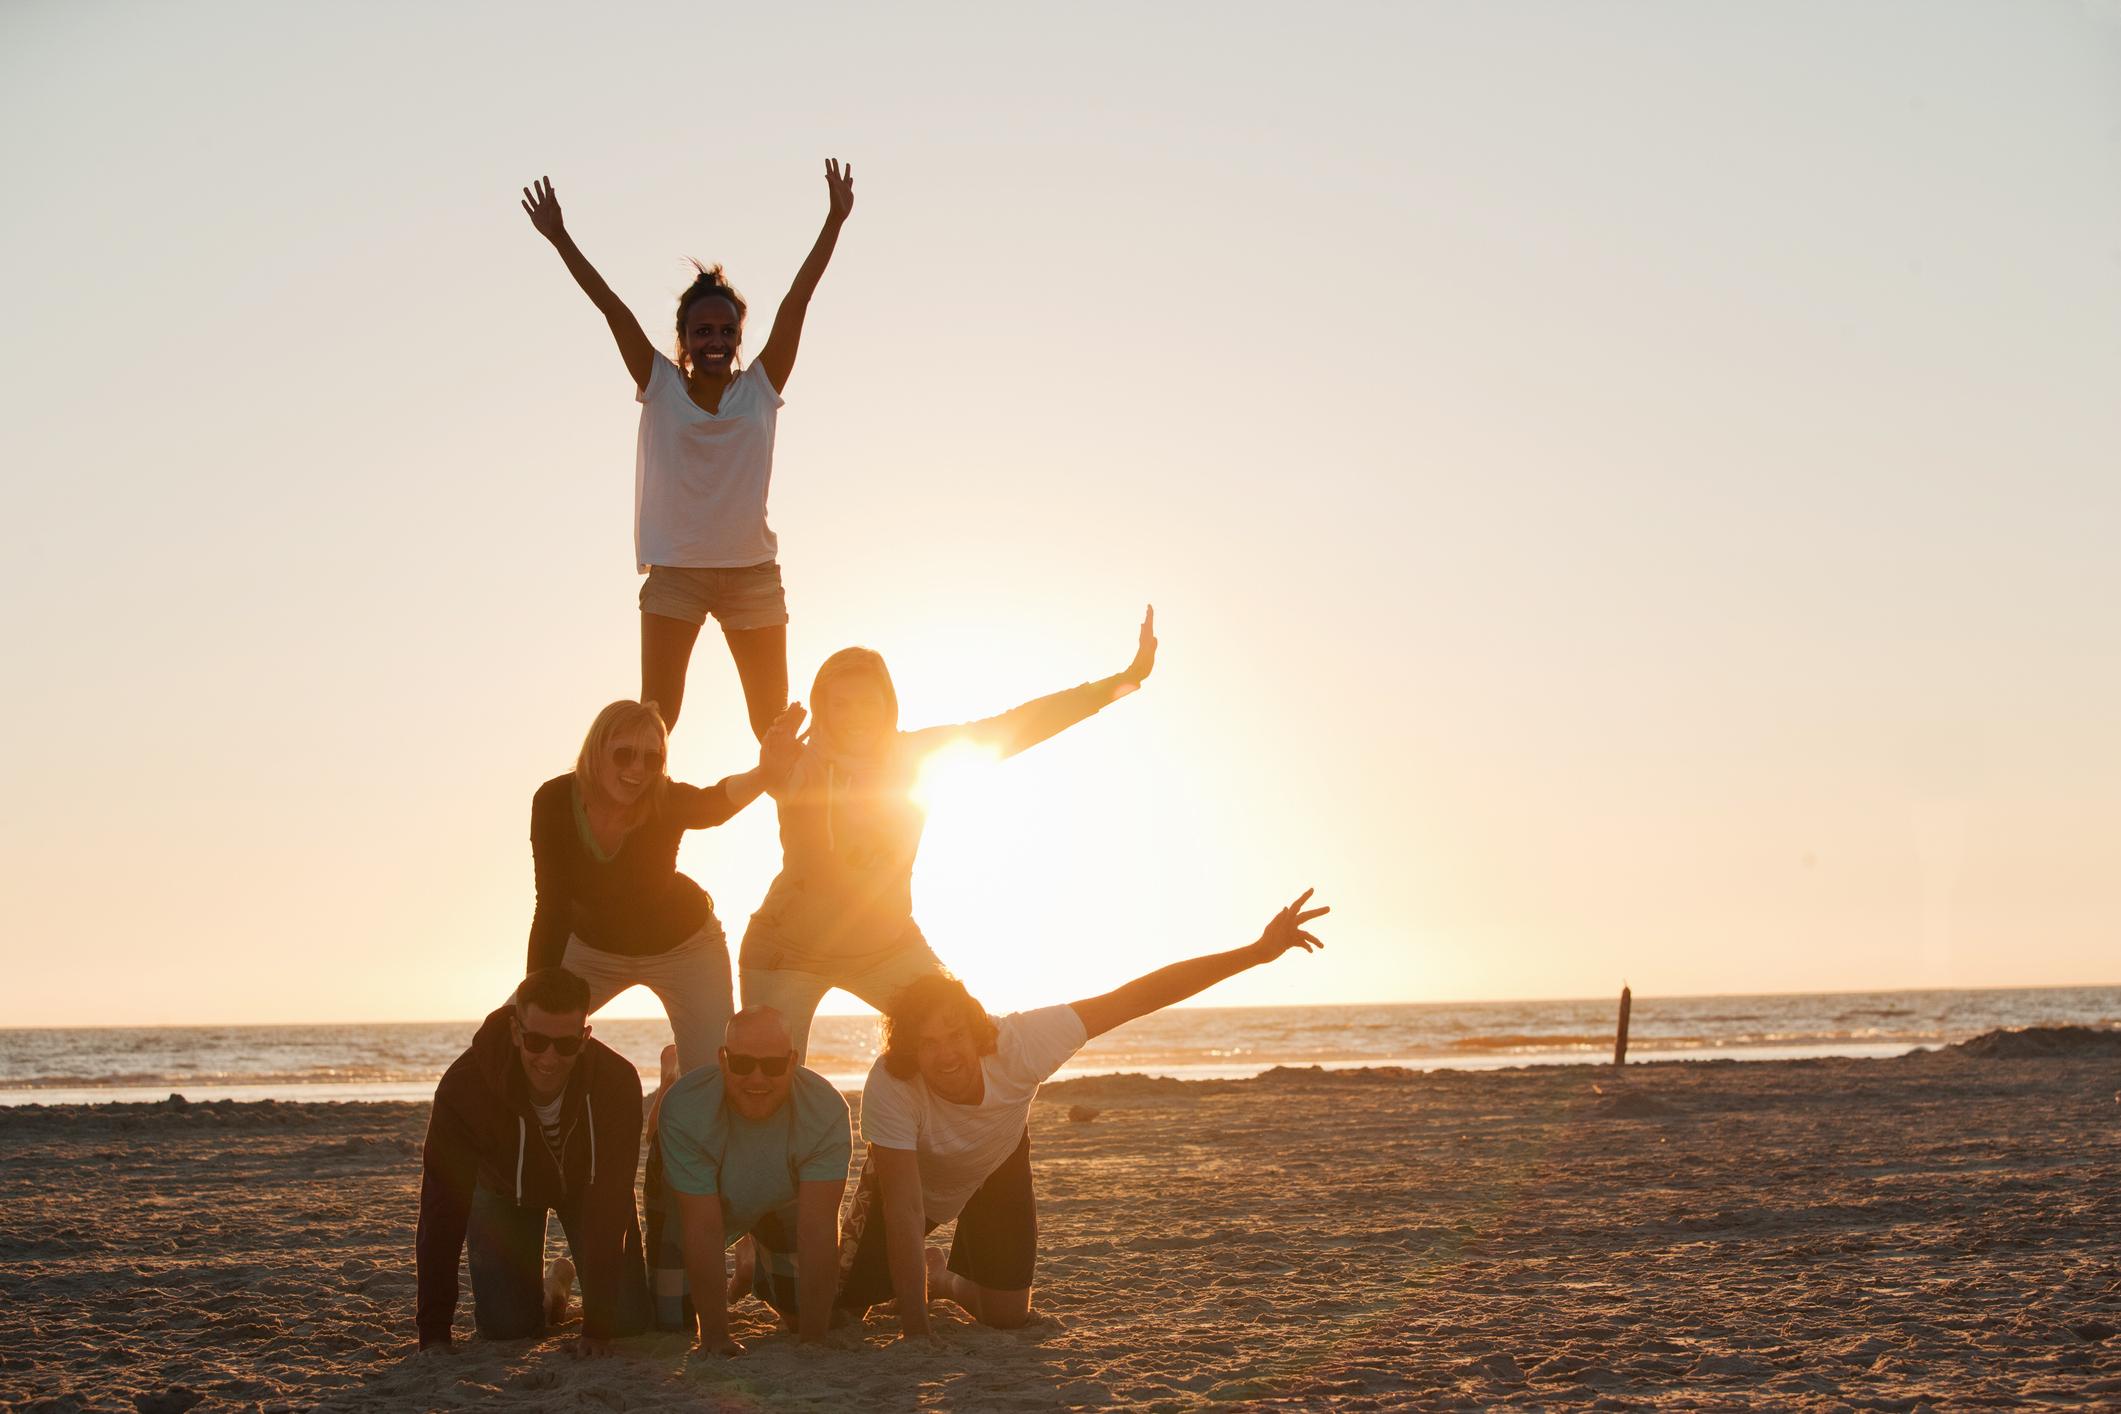 Five people stacked into a pyramid on a beach